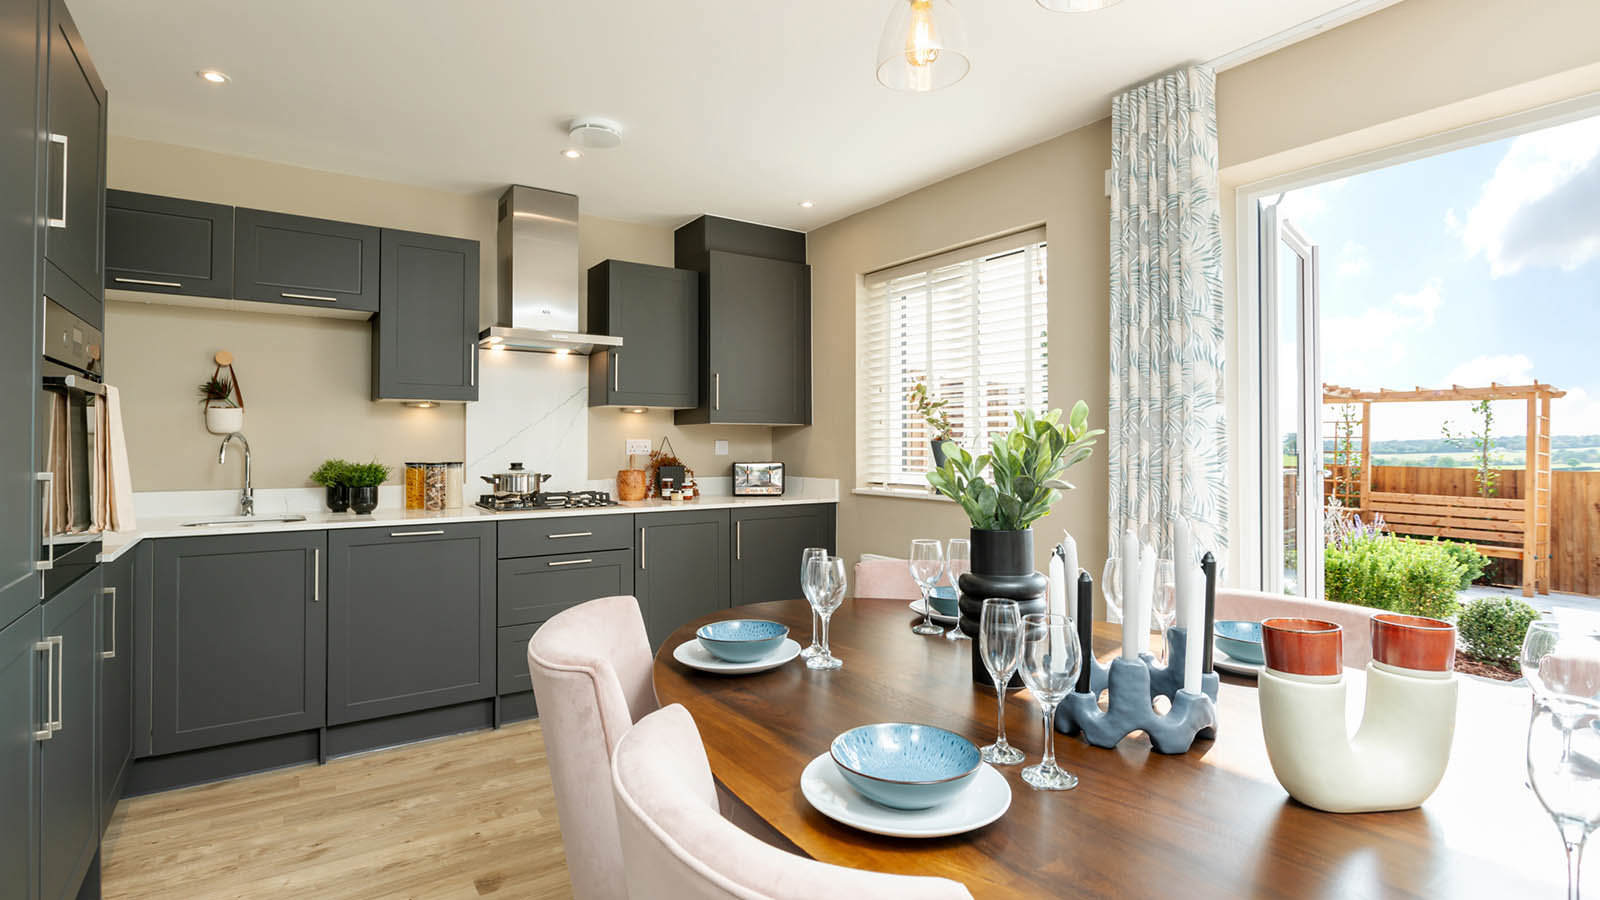 Show home at Old Royal Chace in Enfield (Bellway)